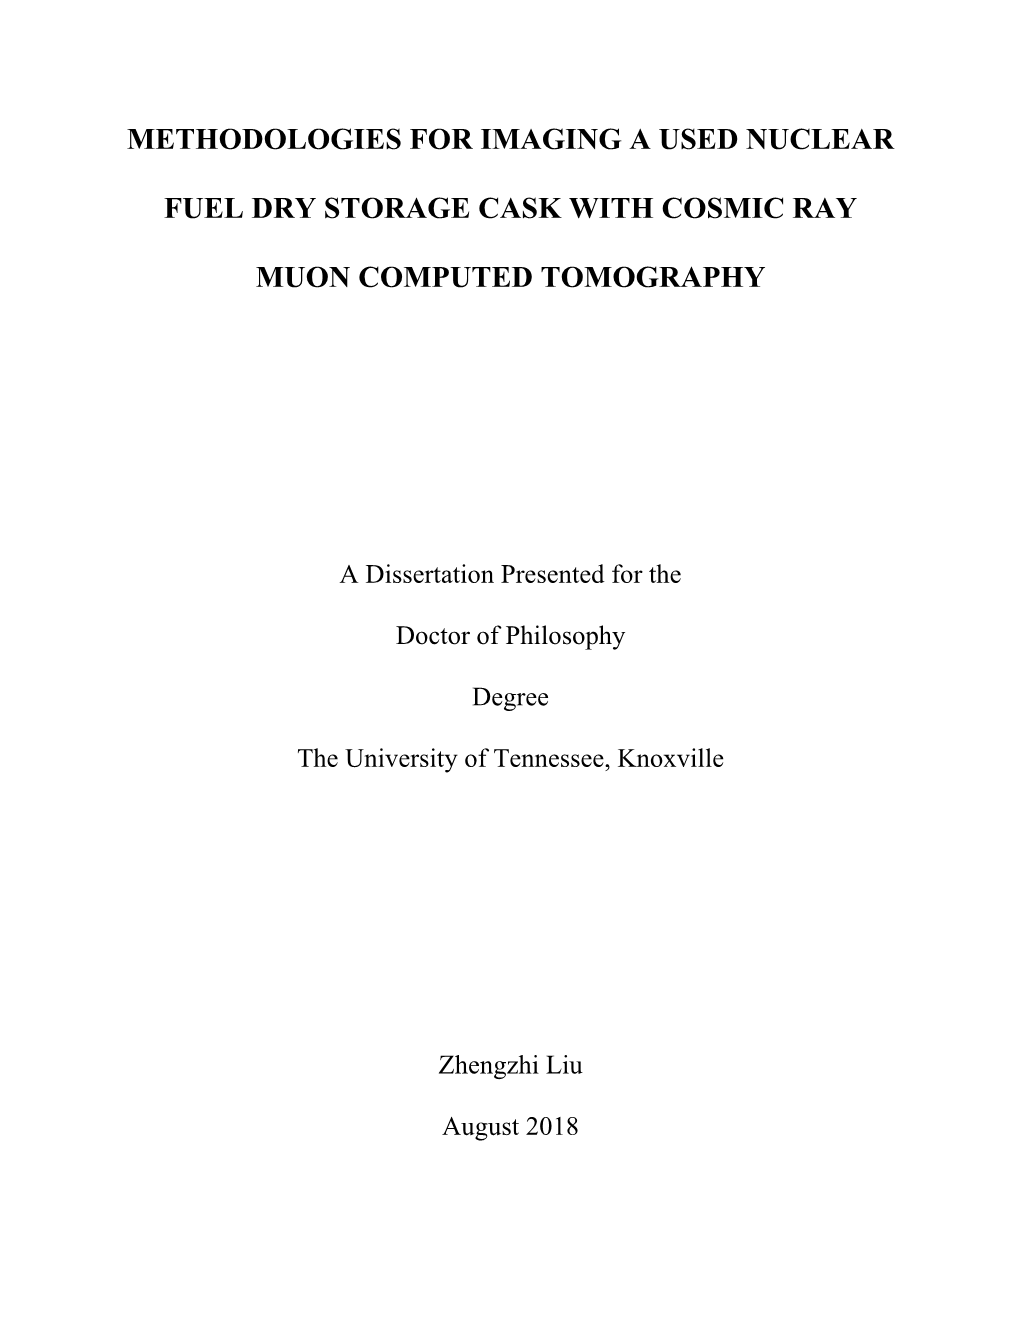 Methodologies for Imaging a Used Nuclear Fuel Dry